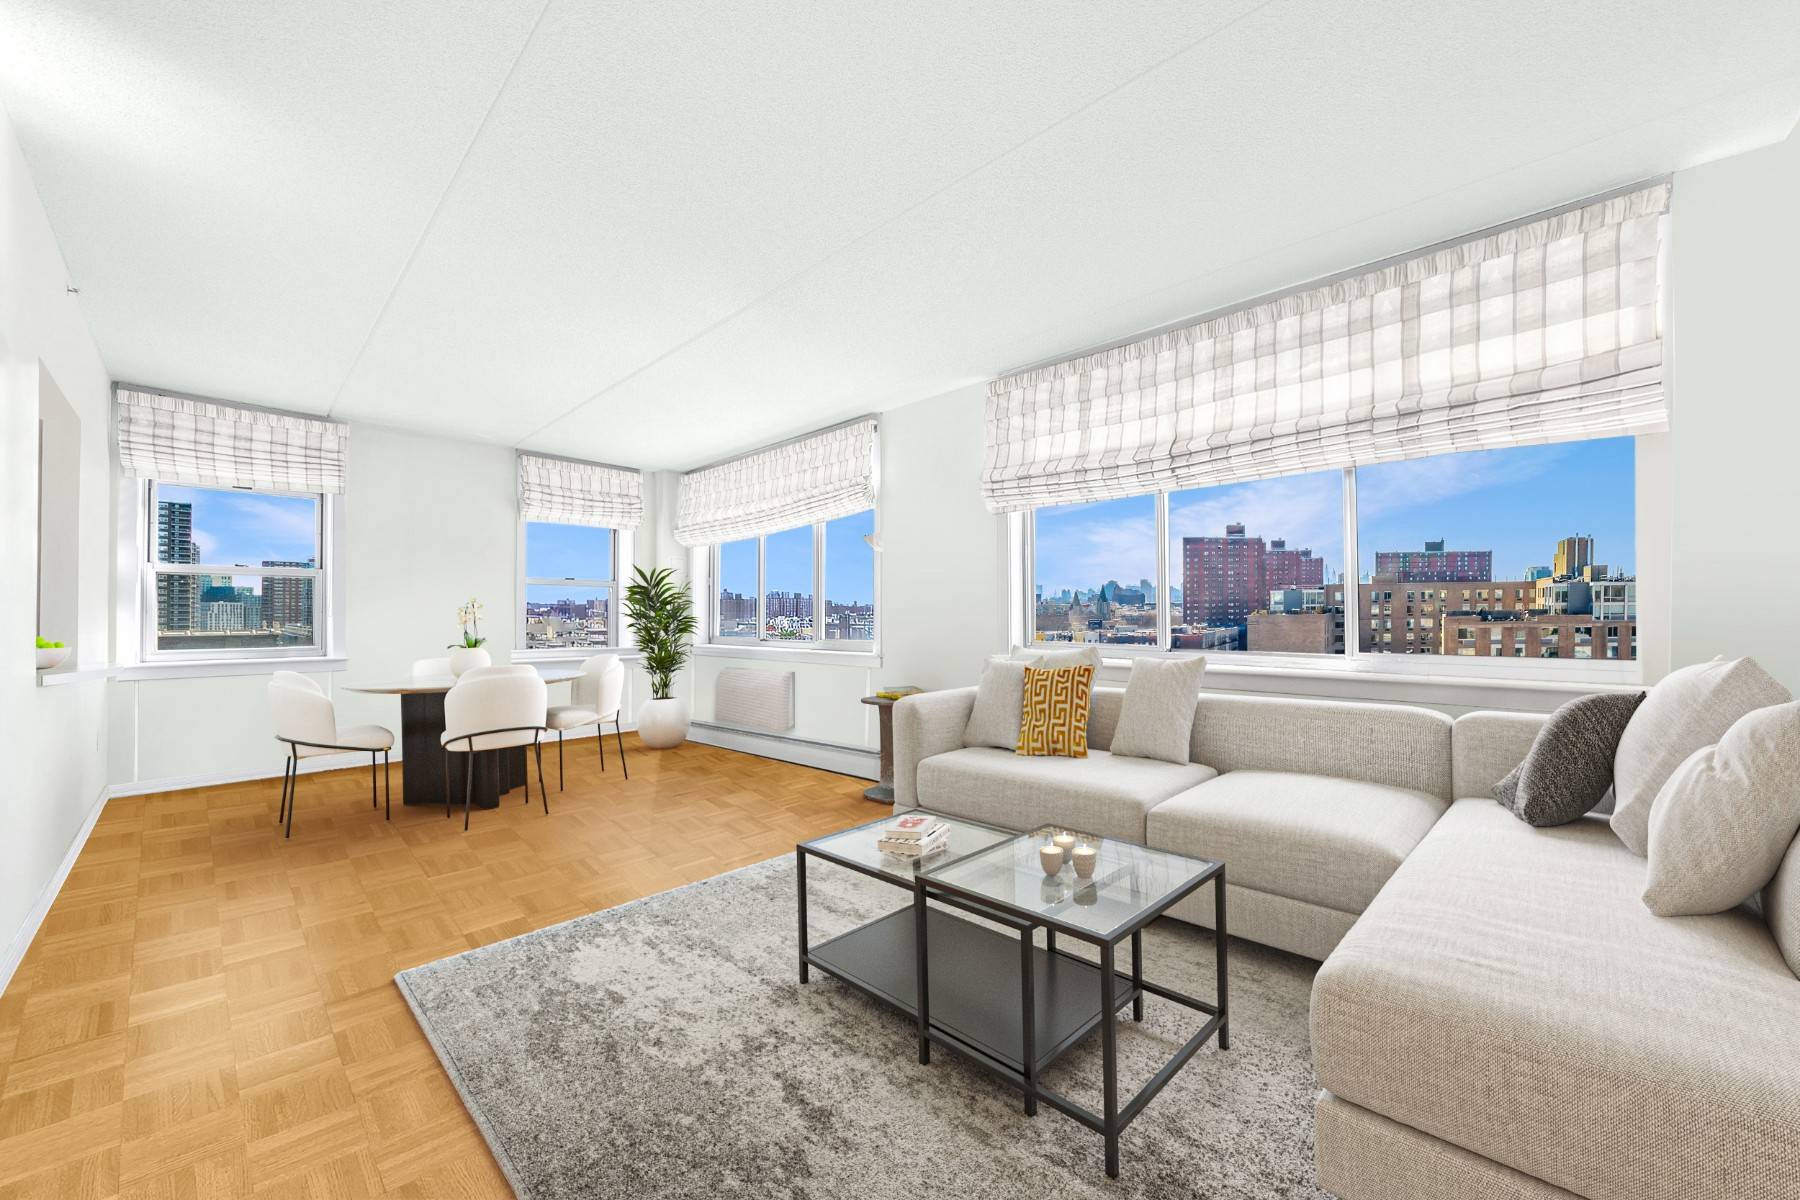 Perched high above it all on the penthouse floor of a full service property built in 2007 rests this dreamy corner apartment with unobstructed views comprising 15 windows in 3 ...